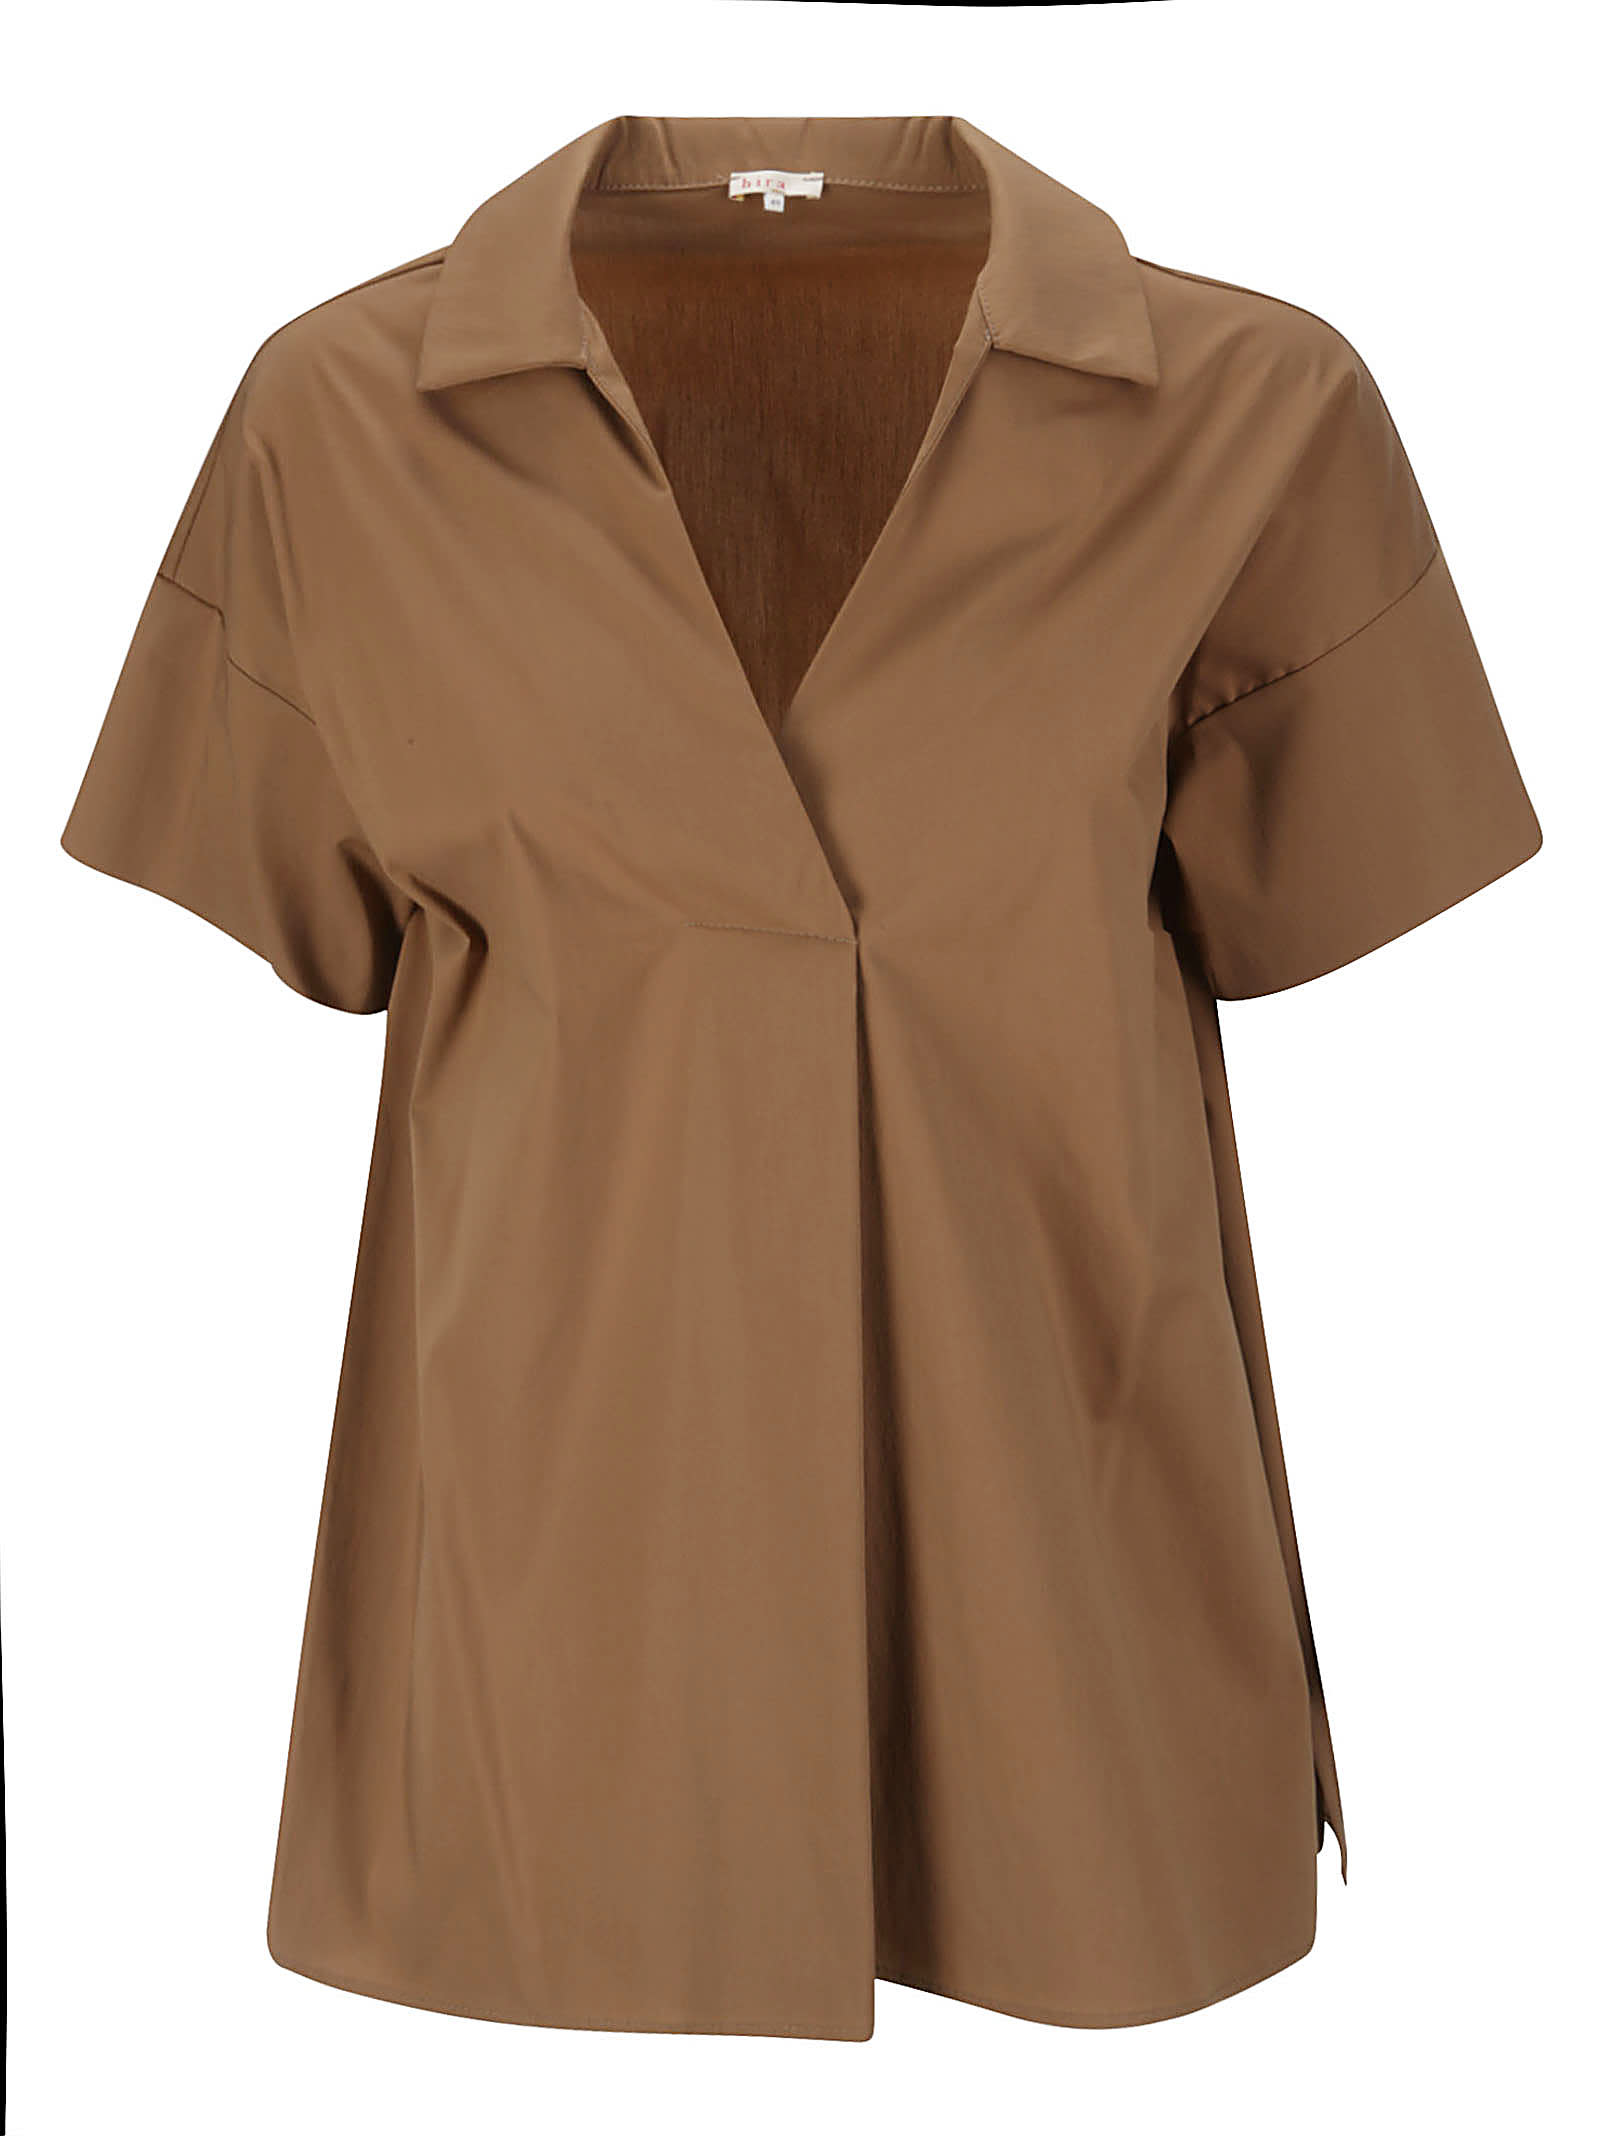 Large Cotton Shirt Without Buttons